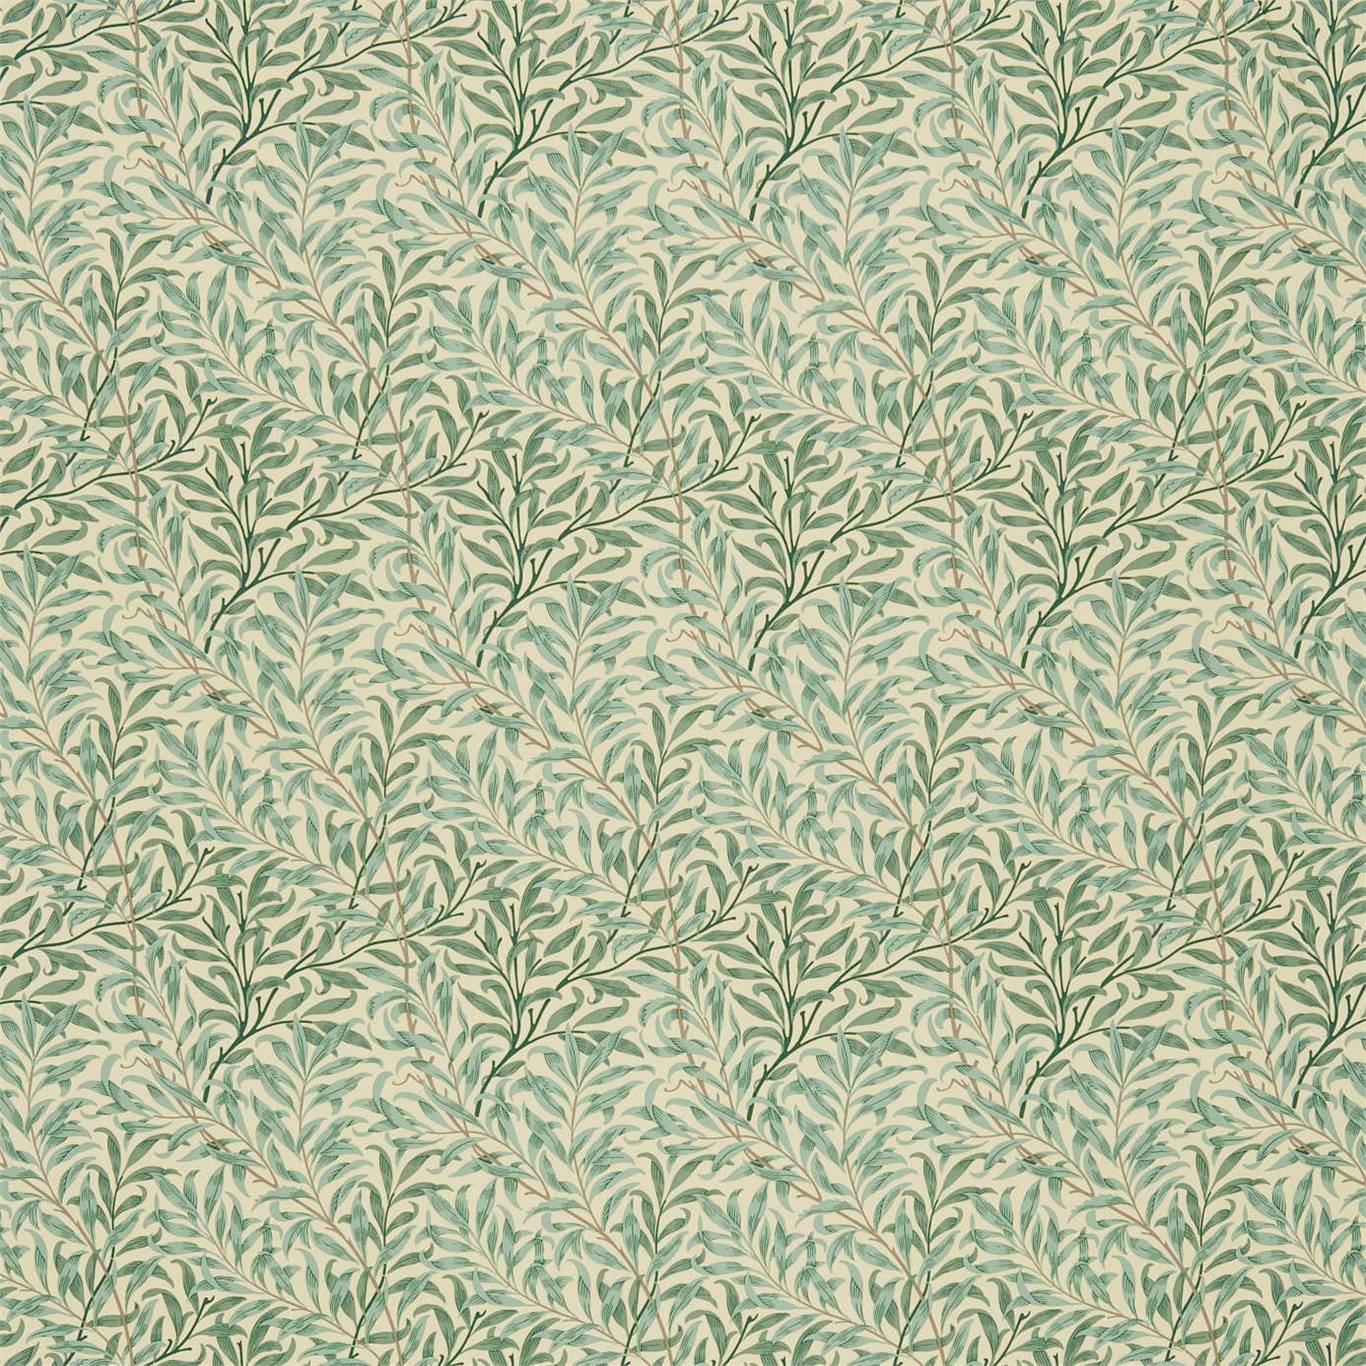 Willow Boughs Cream/Pale Green Fabric by MOR